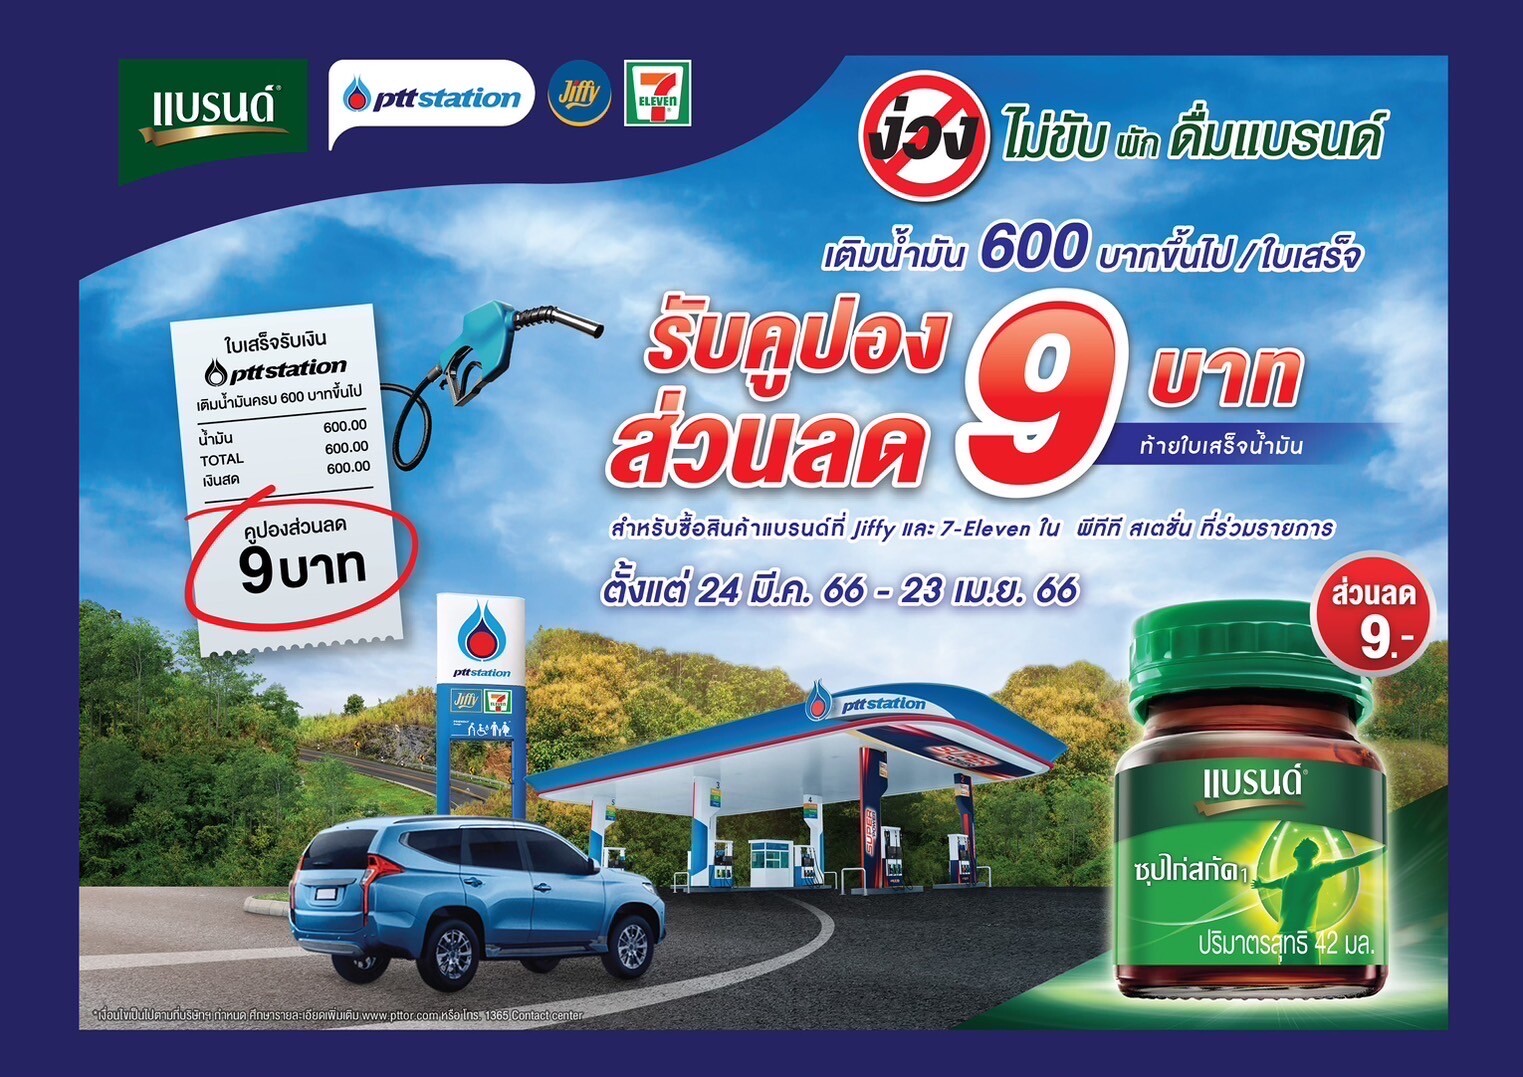 BRAND'S Essence of Chicken, in collaboration with OR, Traffic Police, Highway Police, Tourist Police, and Chiangmai Traffic Police is continuing its road safety campaign